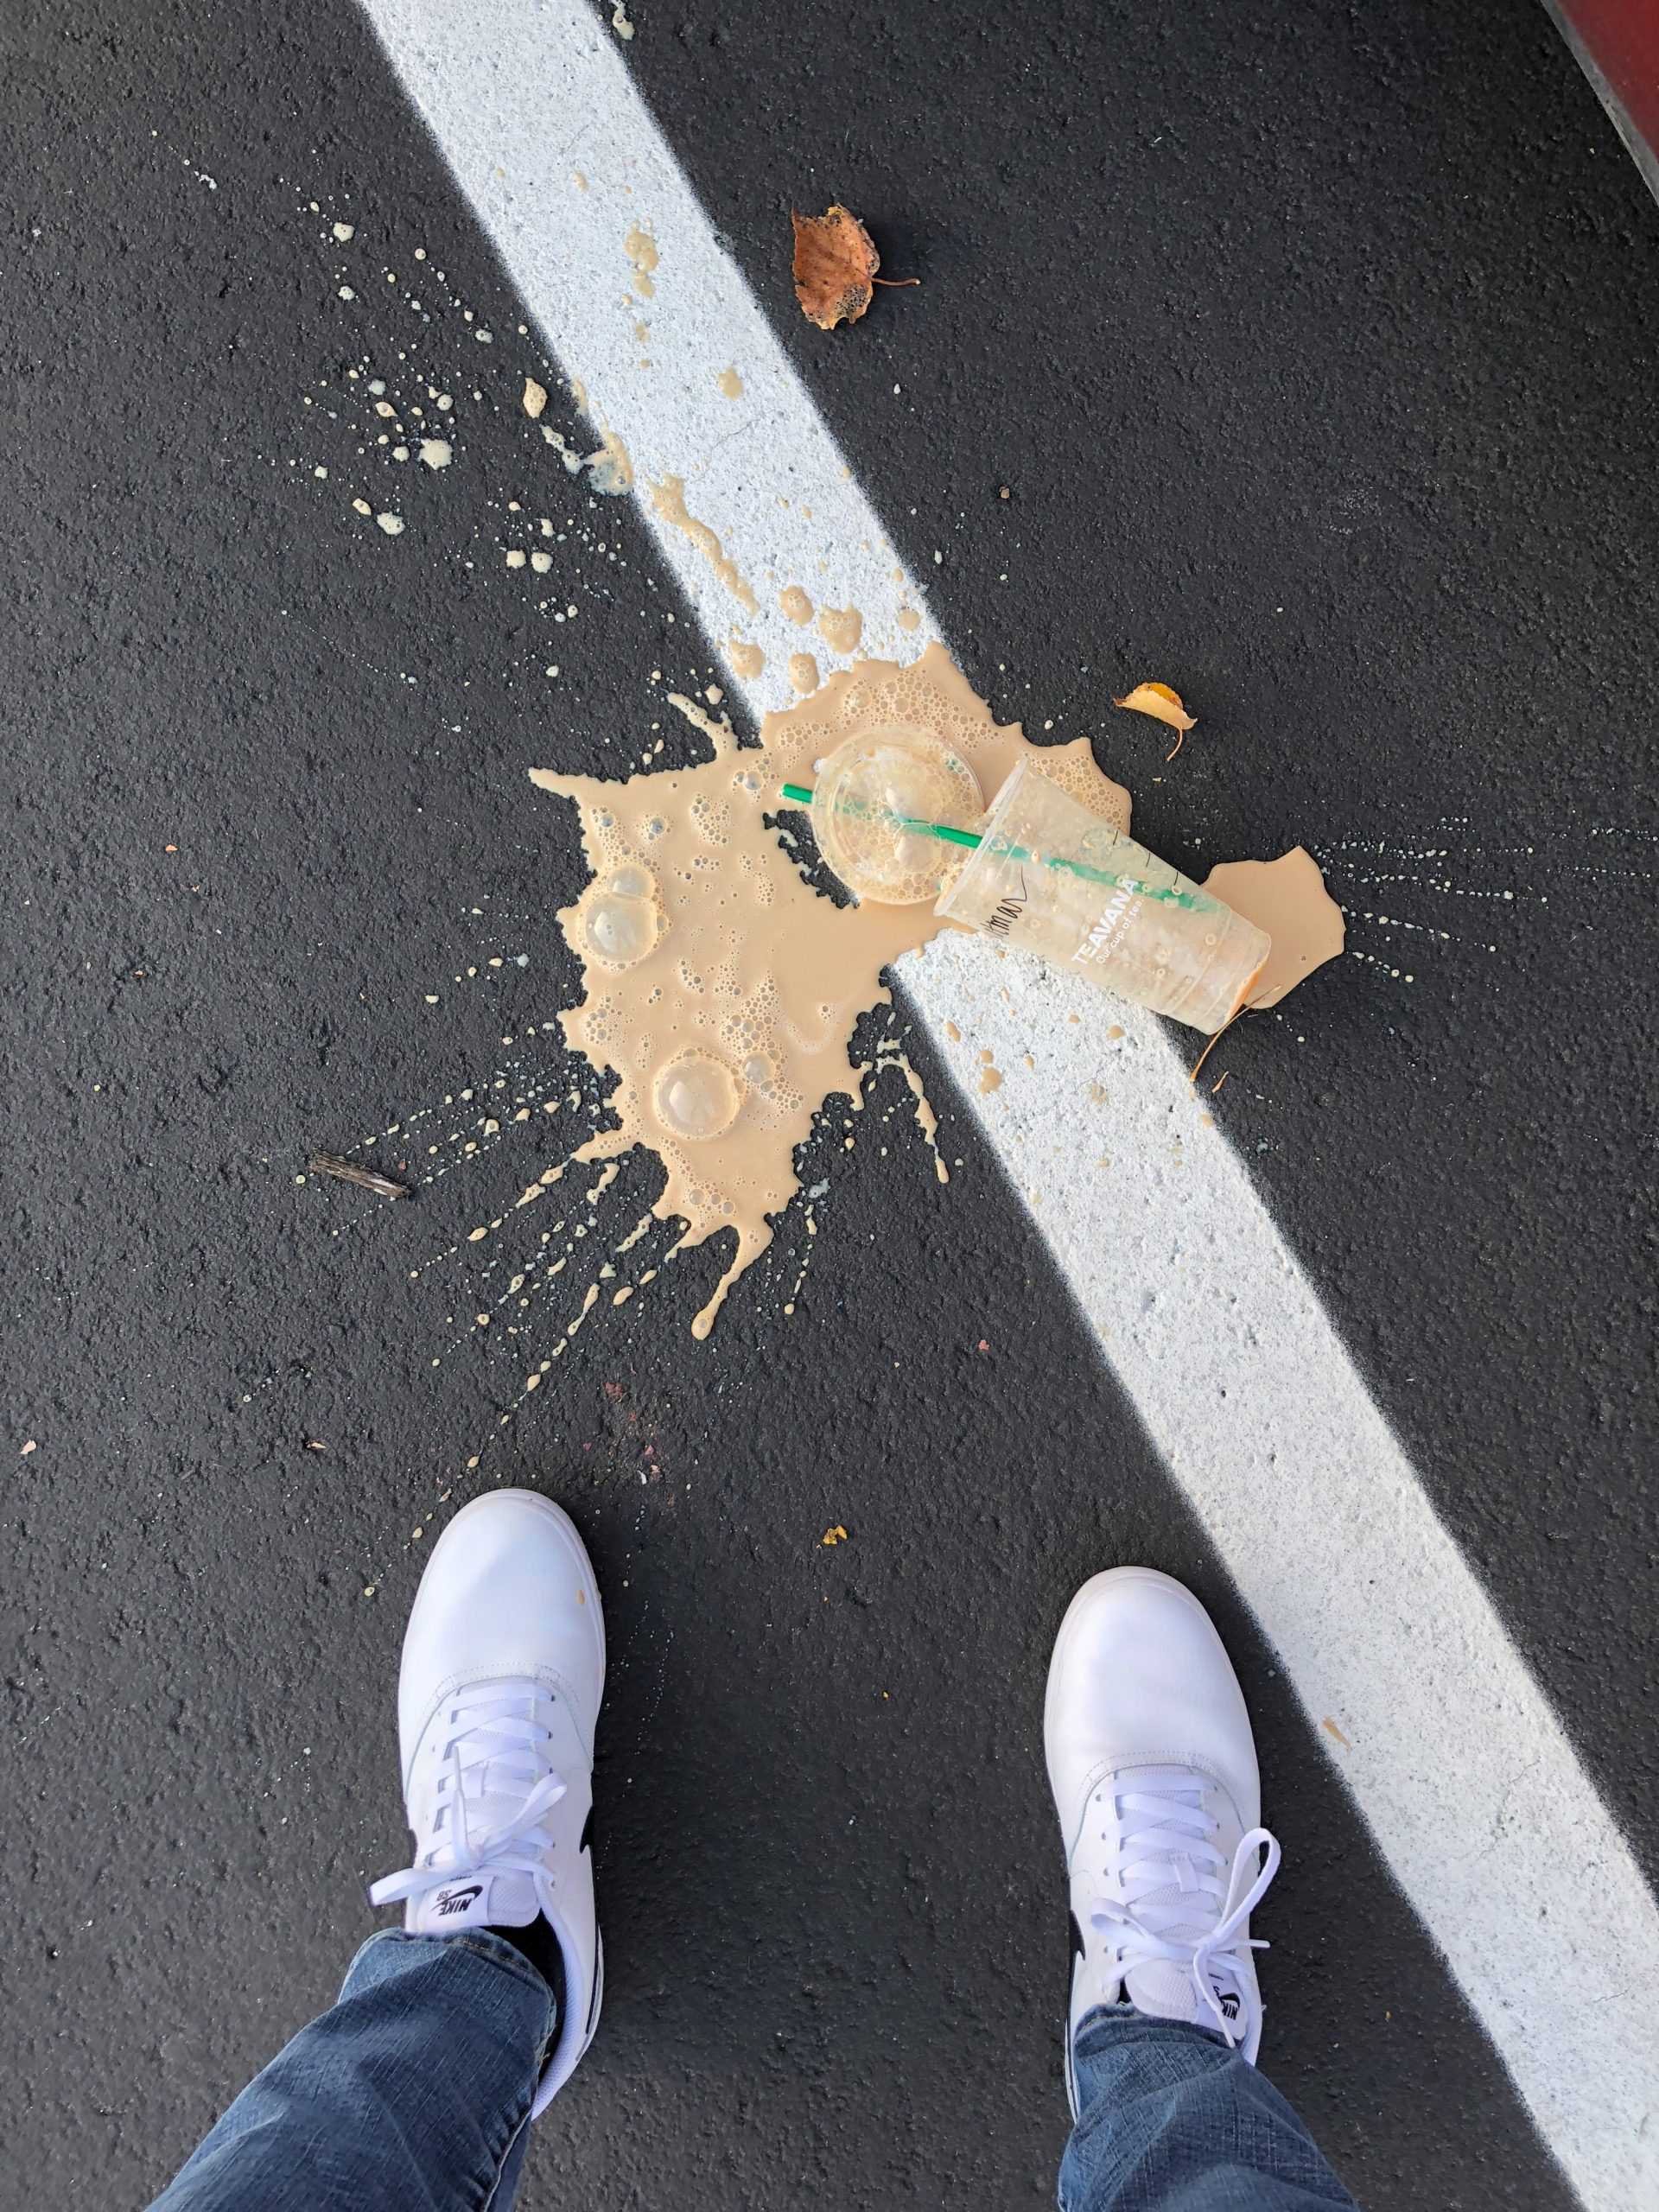 A spilt coffee which has been dropped on the floor.